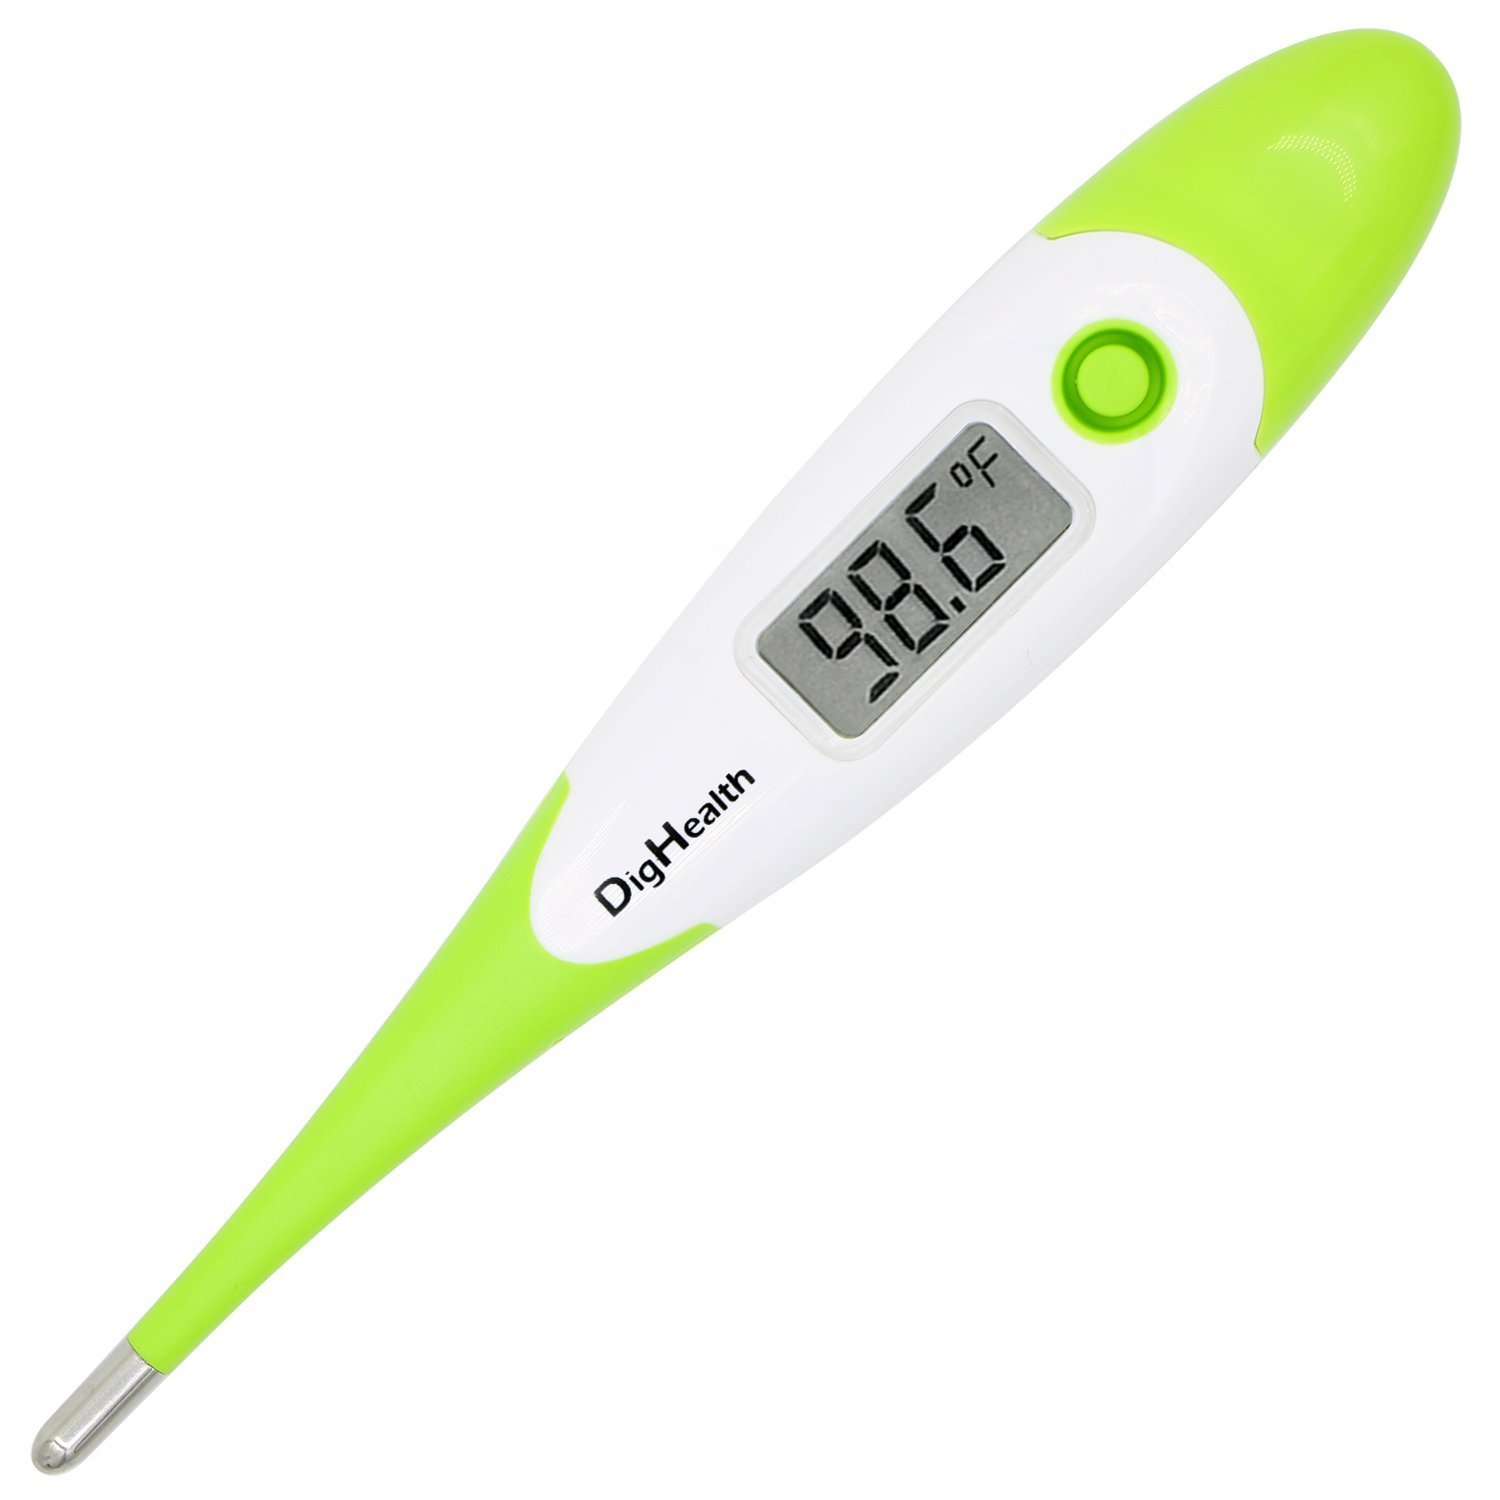 Fever Thermometer Cliparts